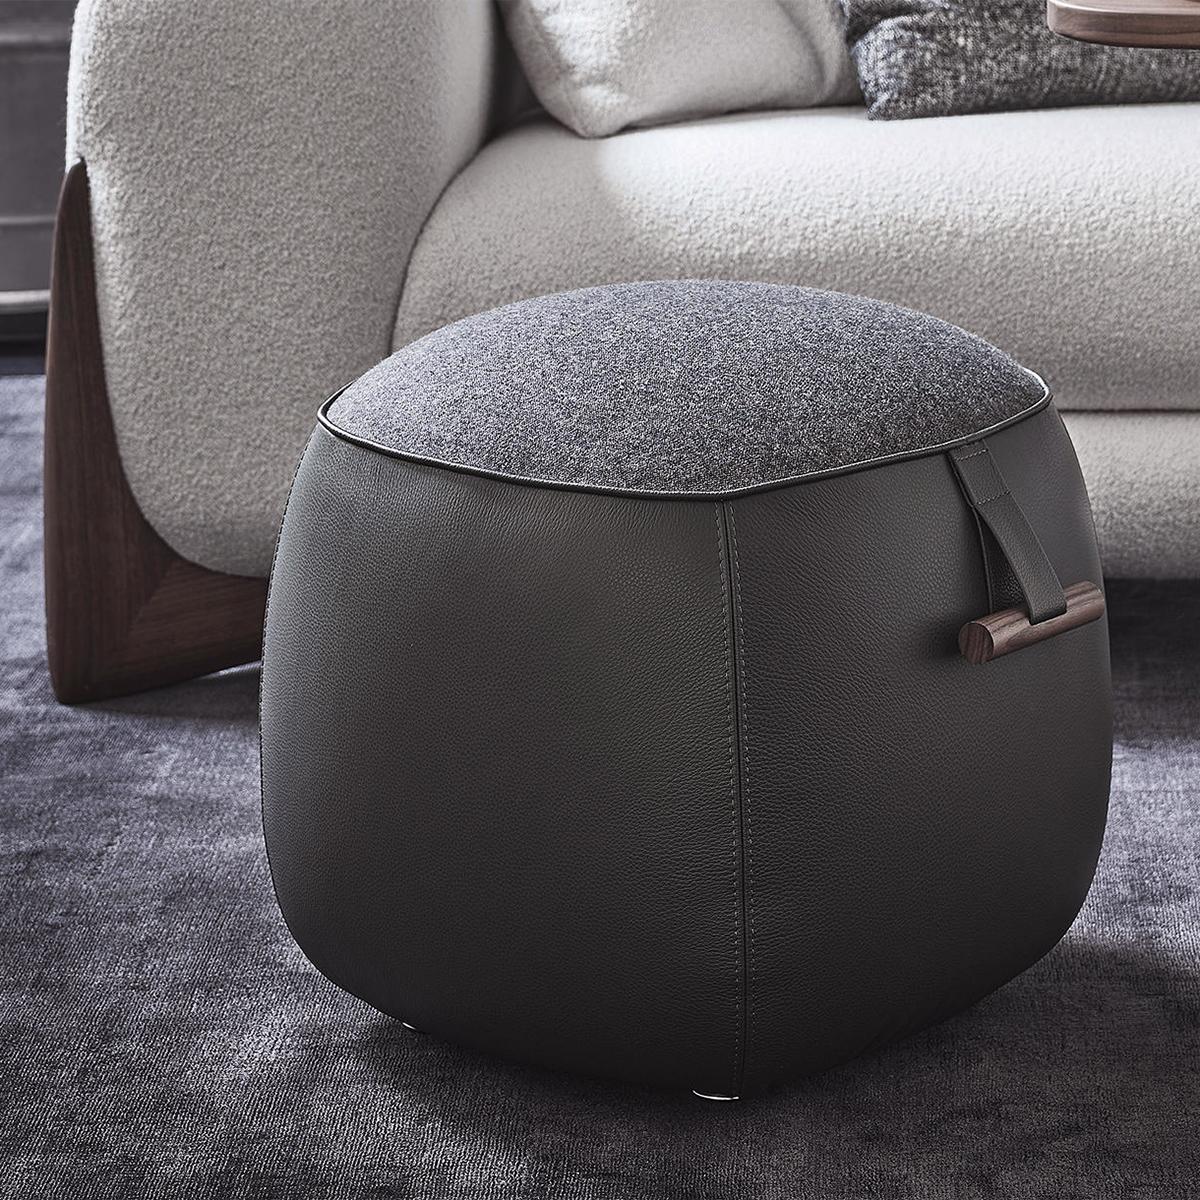 Leather Berlingo Small Pouf For Sale